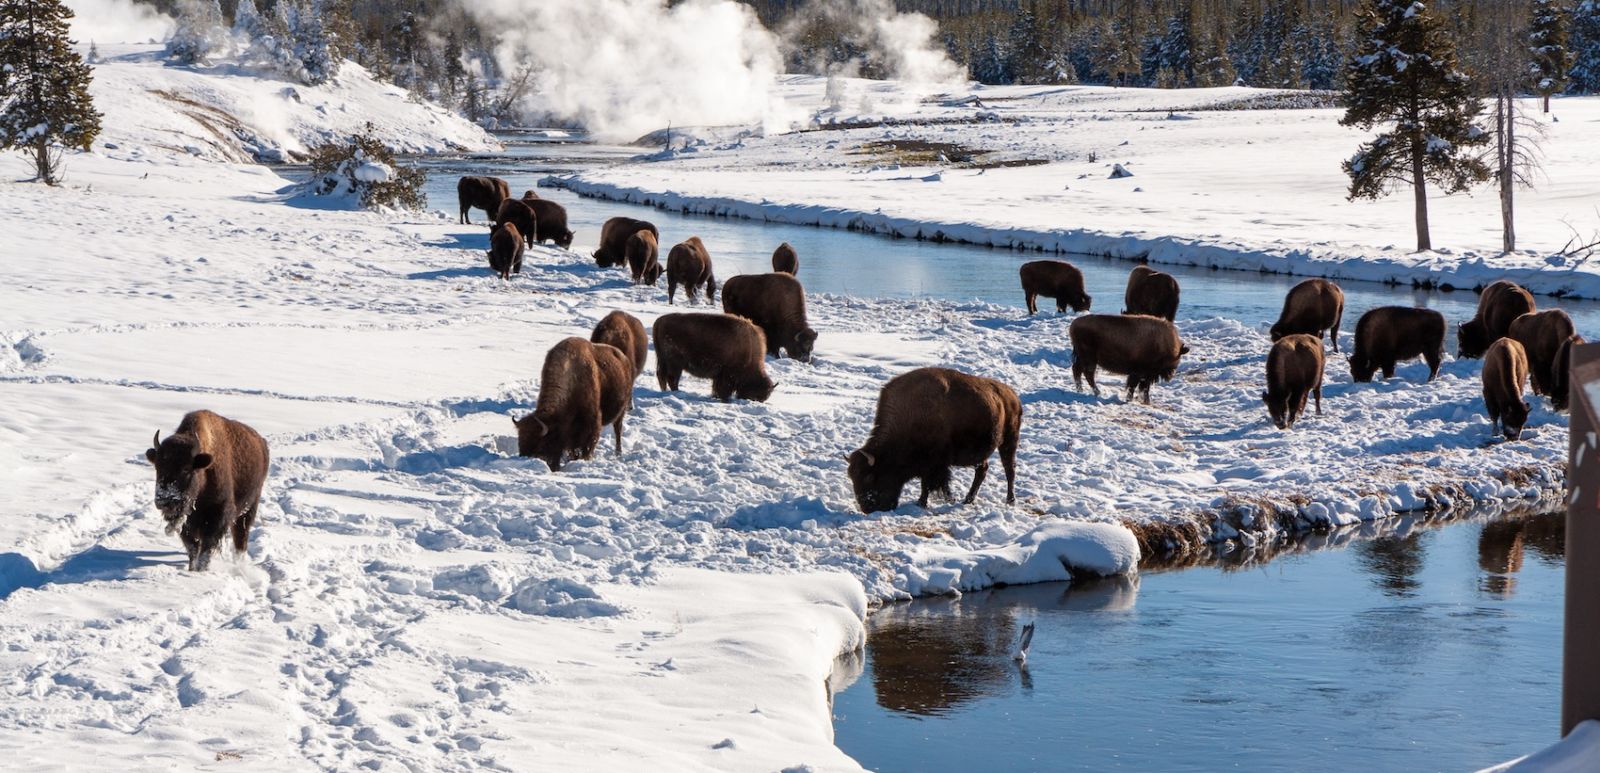 Bison grazing near Yellowstone hot springs in winter